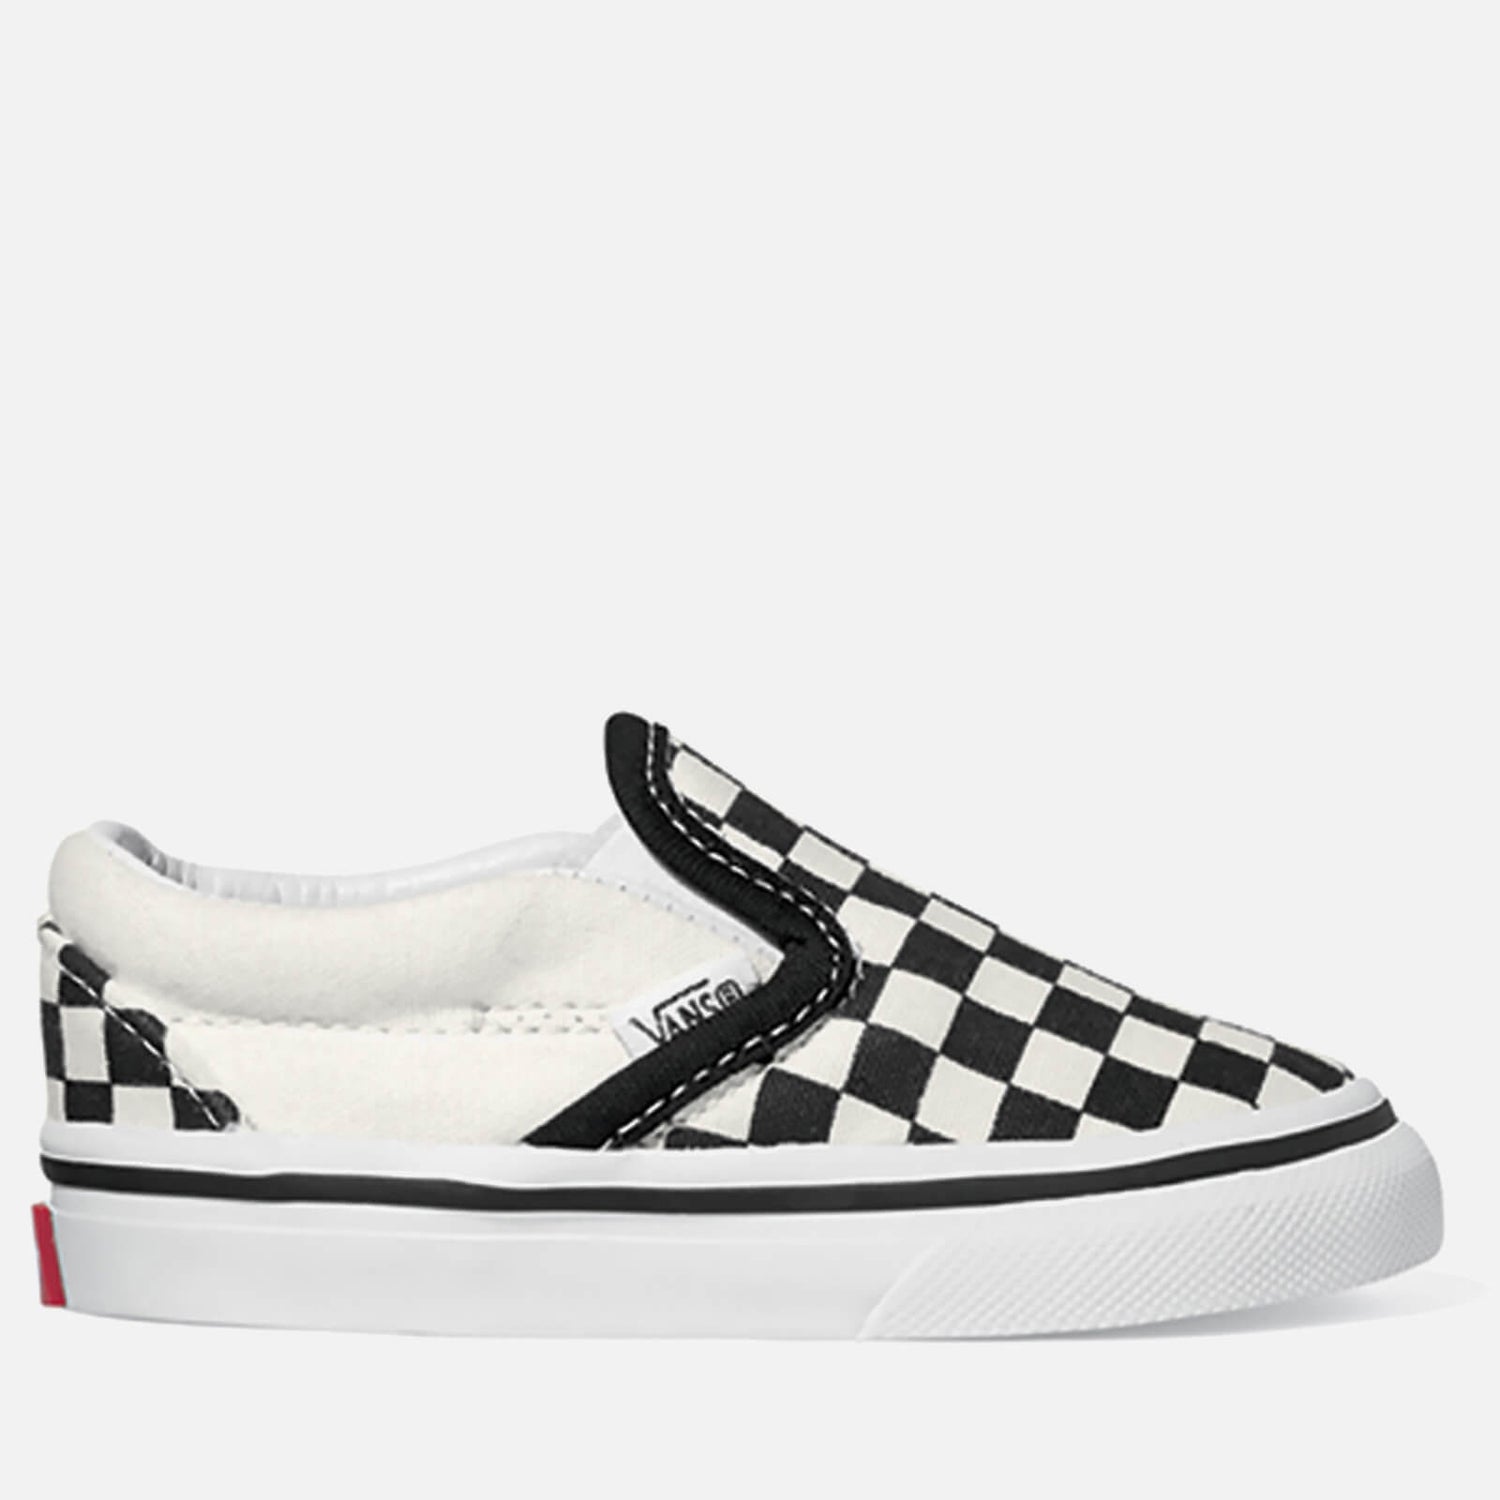 Vans Toddlers' Classic Slip On Checkerboard Trainers - Black / White - UK 3 Baby